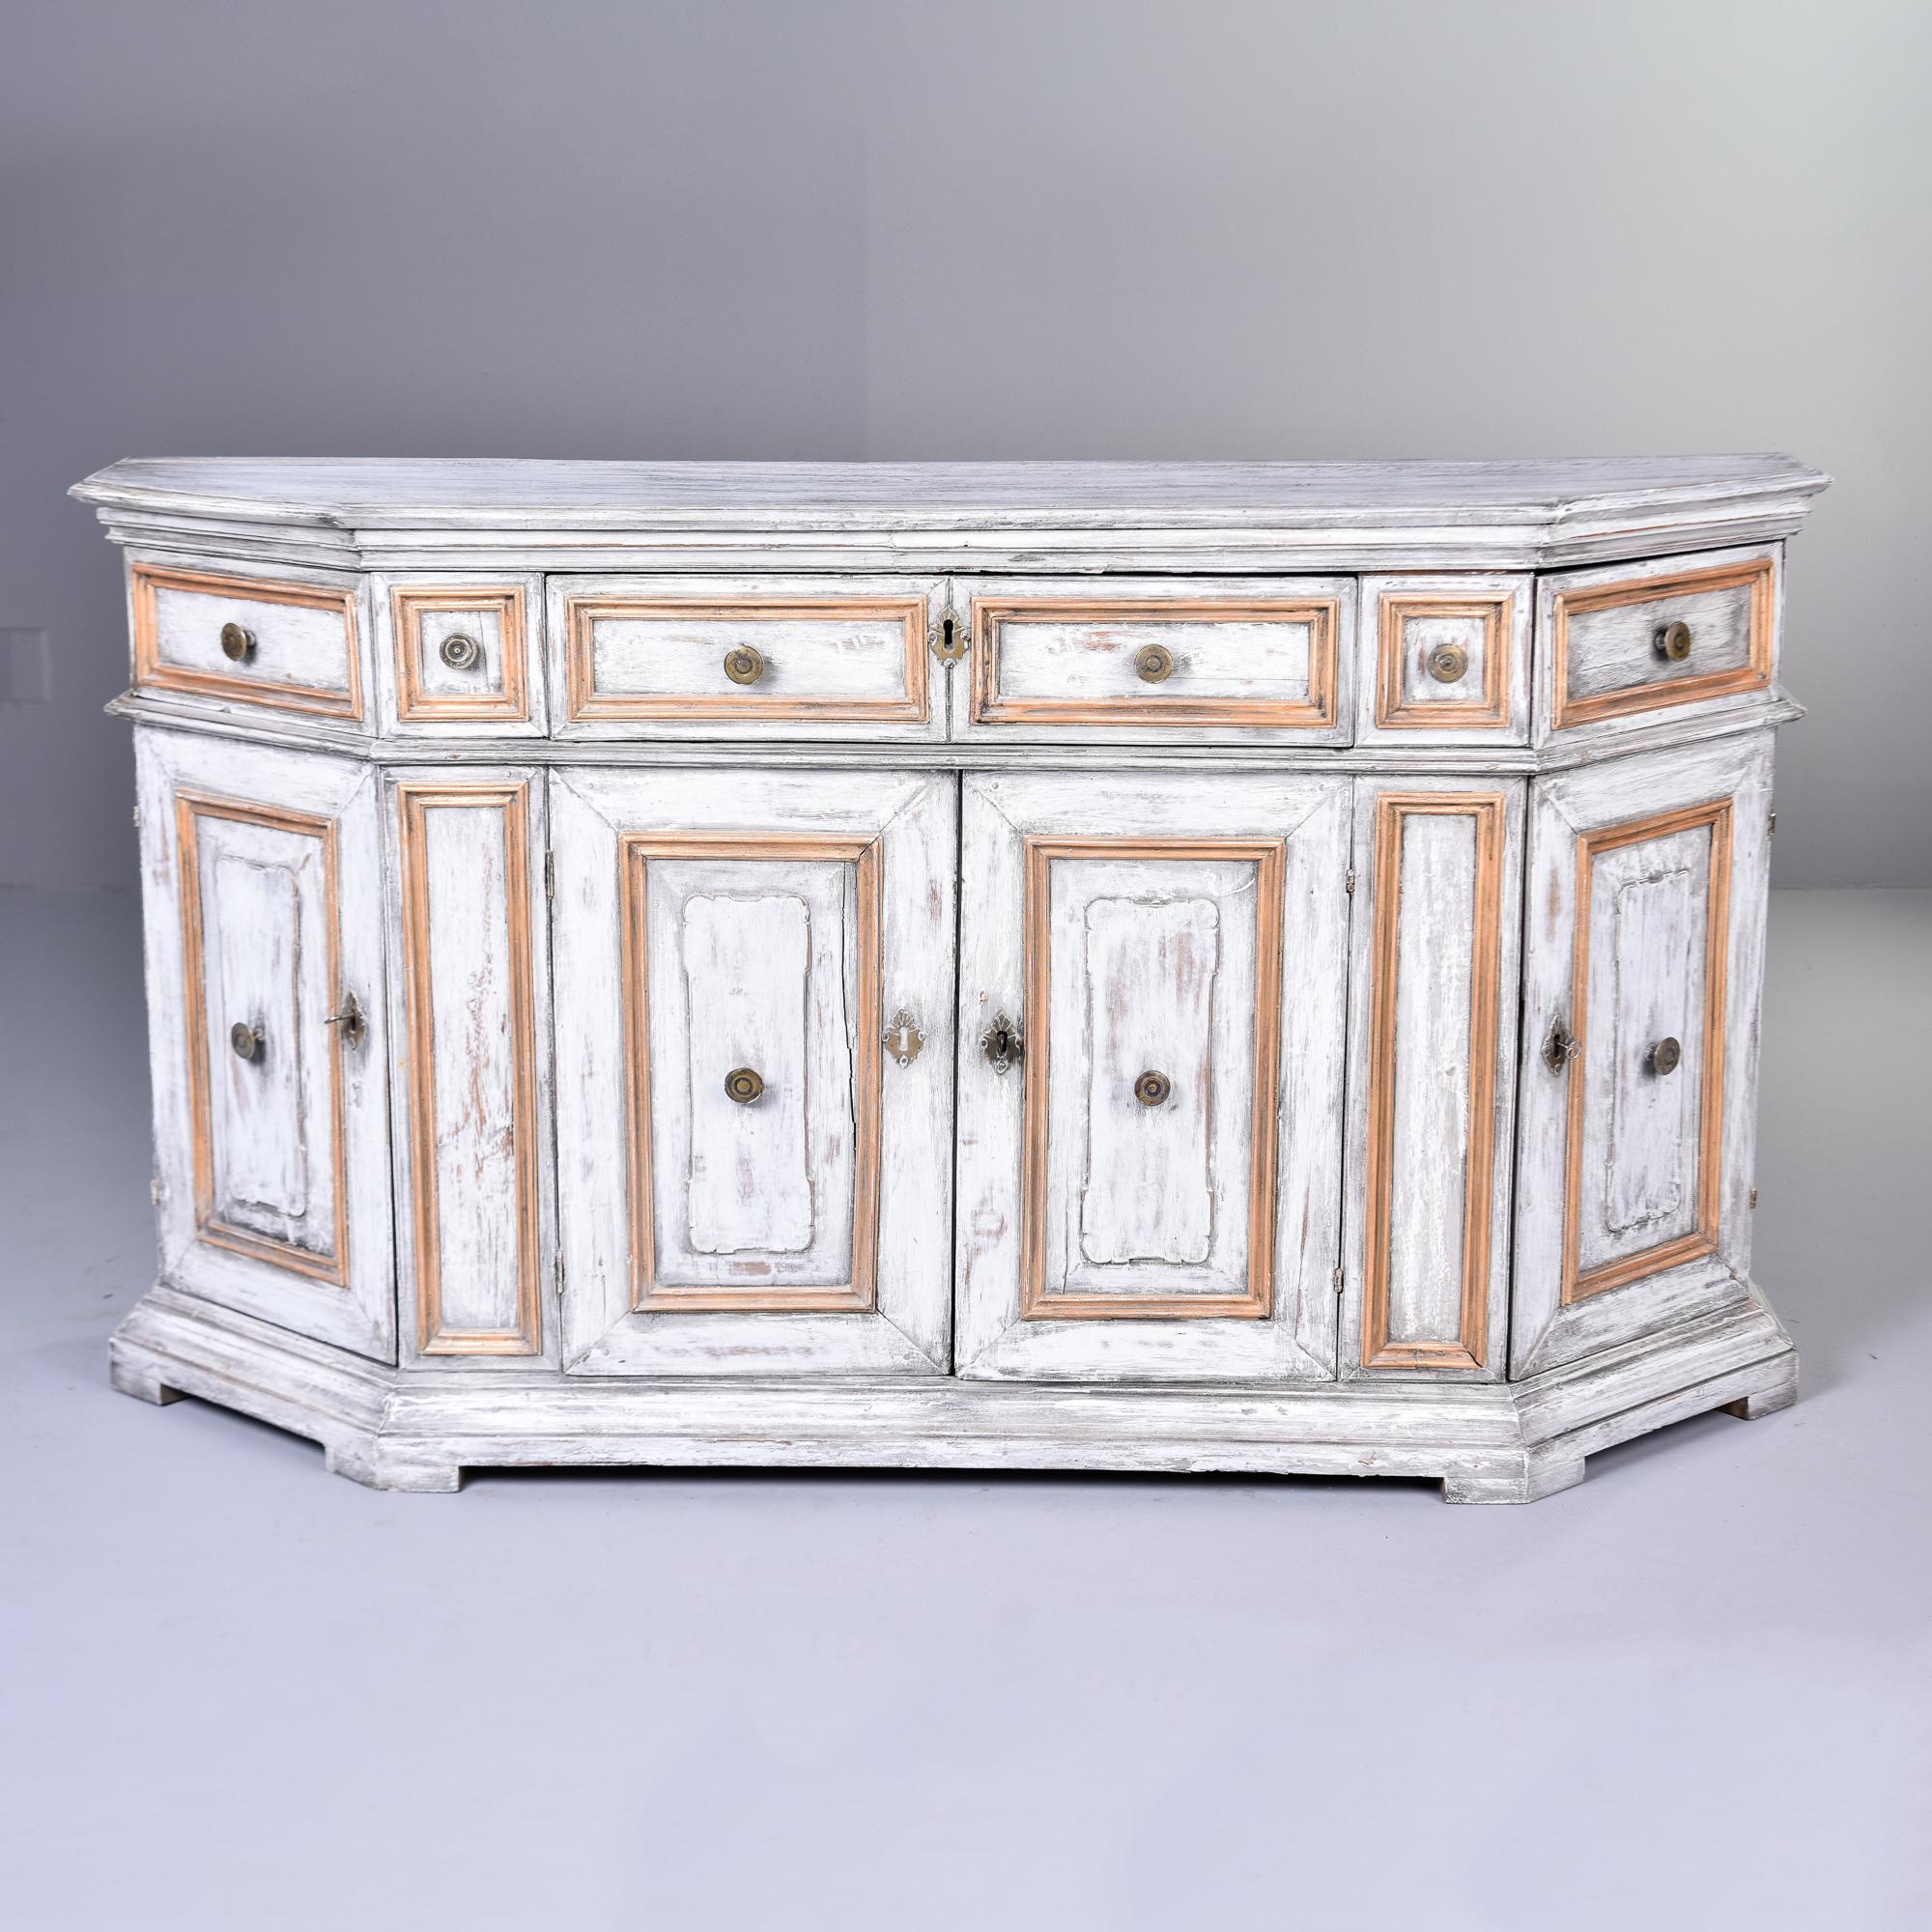 Found in France, this circa 1880s painted bow front cabinet has three functional drawers on the top level plus one false drawer front. Round brass pulls, antique white paint with gilt detailing on drawer and door panels. Bottom center cabinet has a